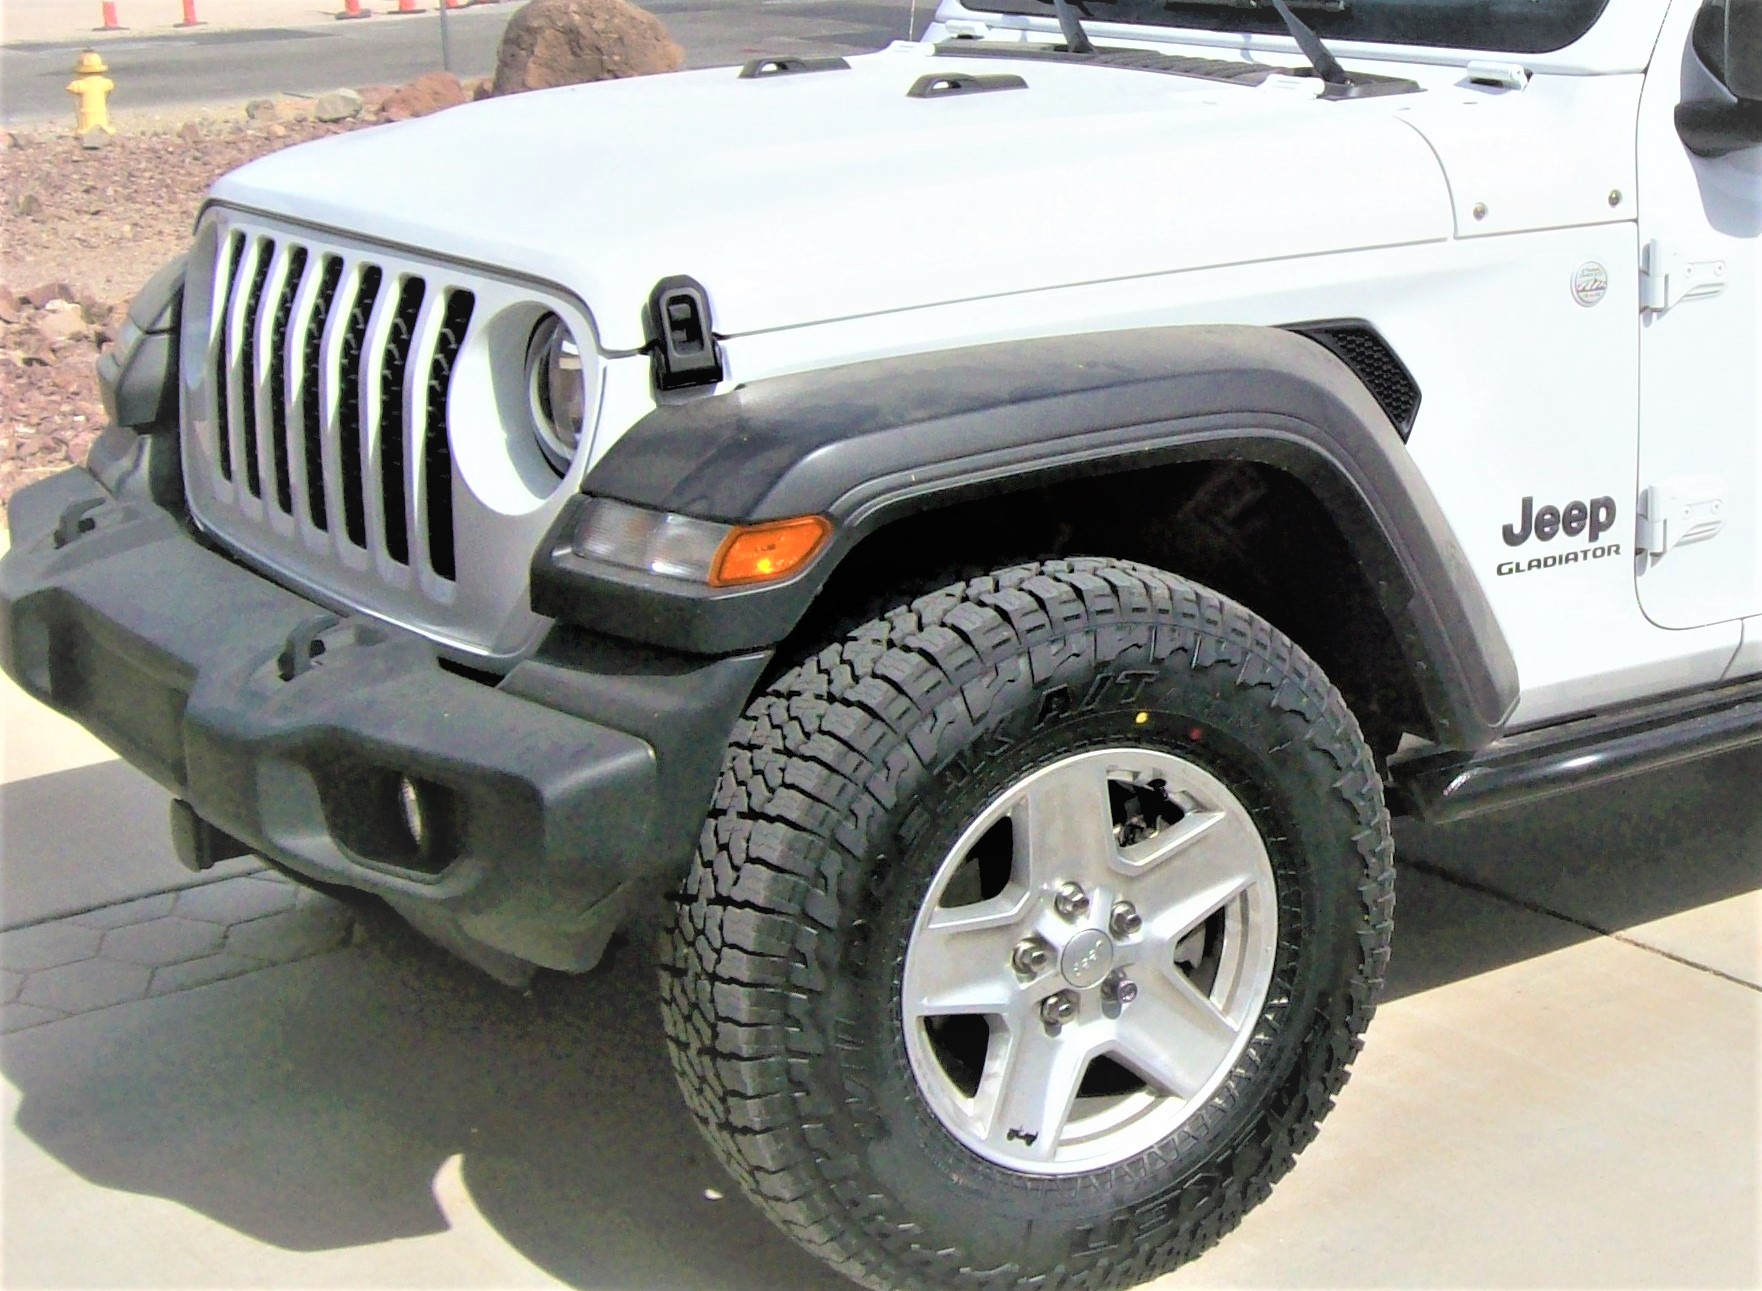 Jeep Gladiator Stock Rims With Larger Tire Question 101_1722 (3).JPG